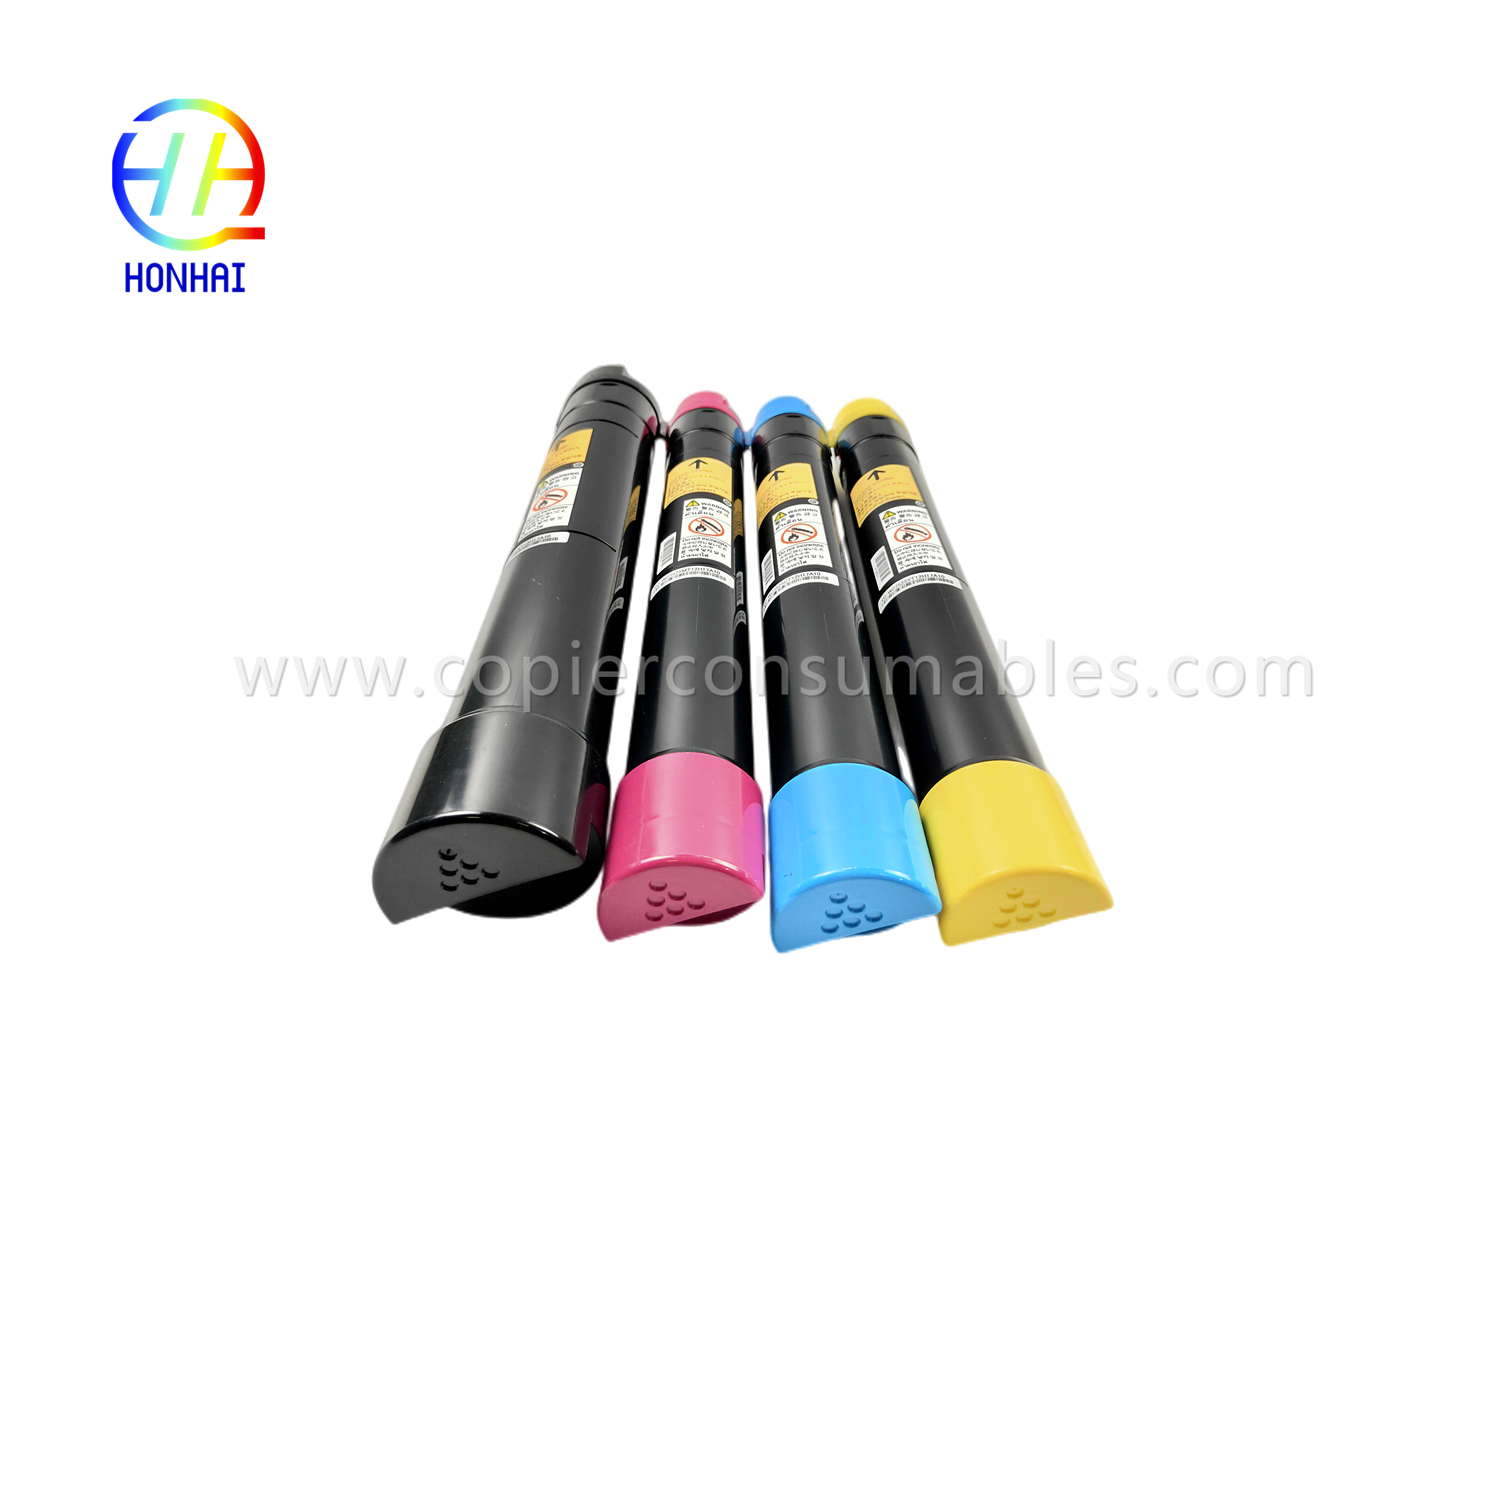 https://www.copierconsumables.com/toner-cartridge-imported-powder-set-bcmy-for-xerox-workcentre-7830-7835-7845-7855-7970-7525-7530-7535-7545-7556-500 006r01514-006r01515-006r01516-product/